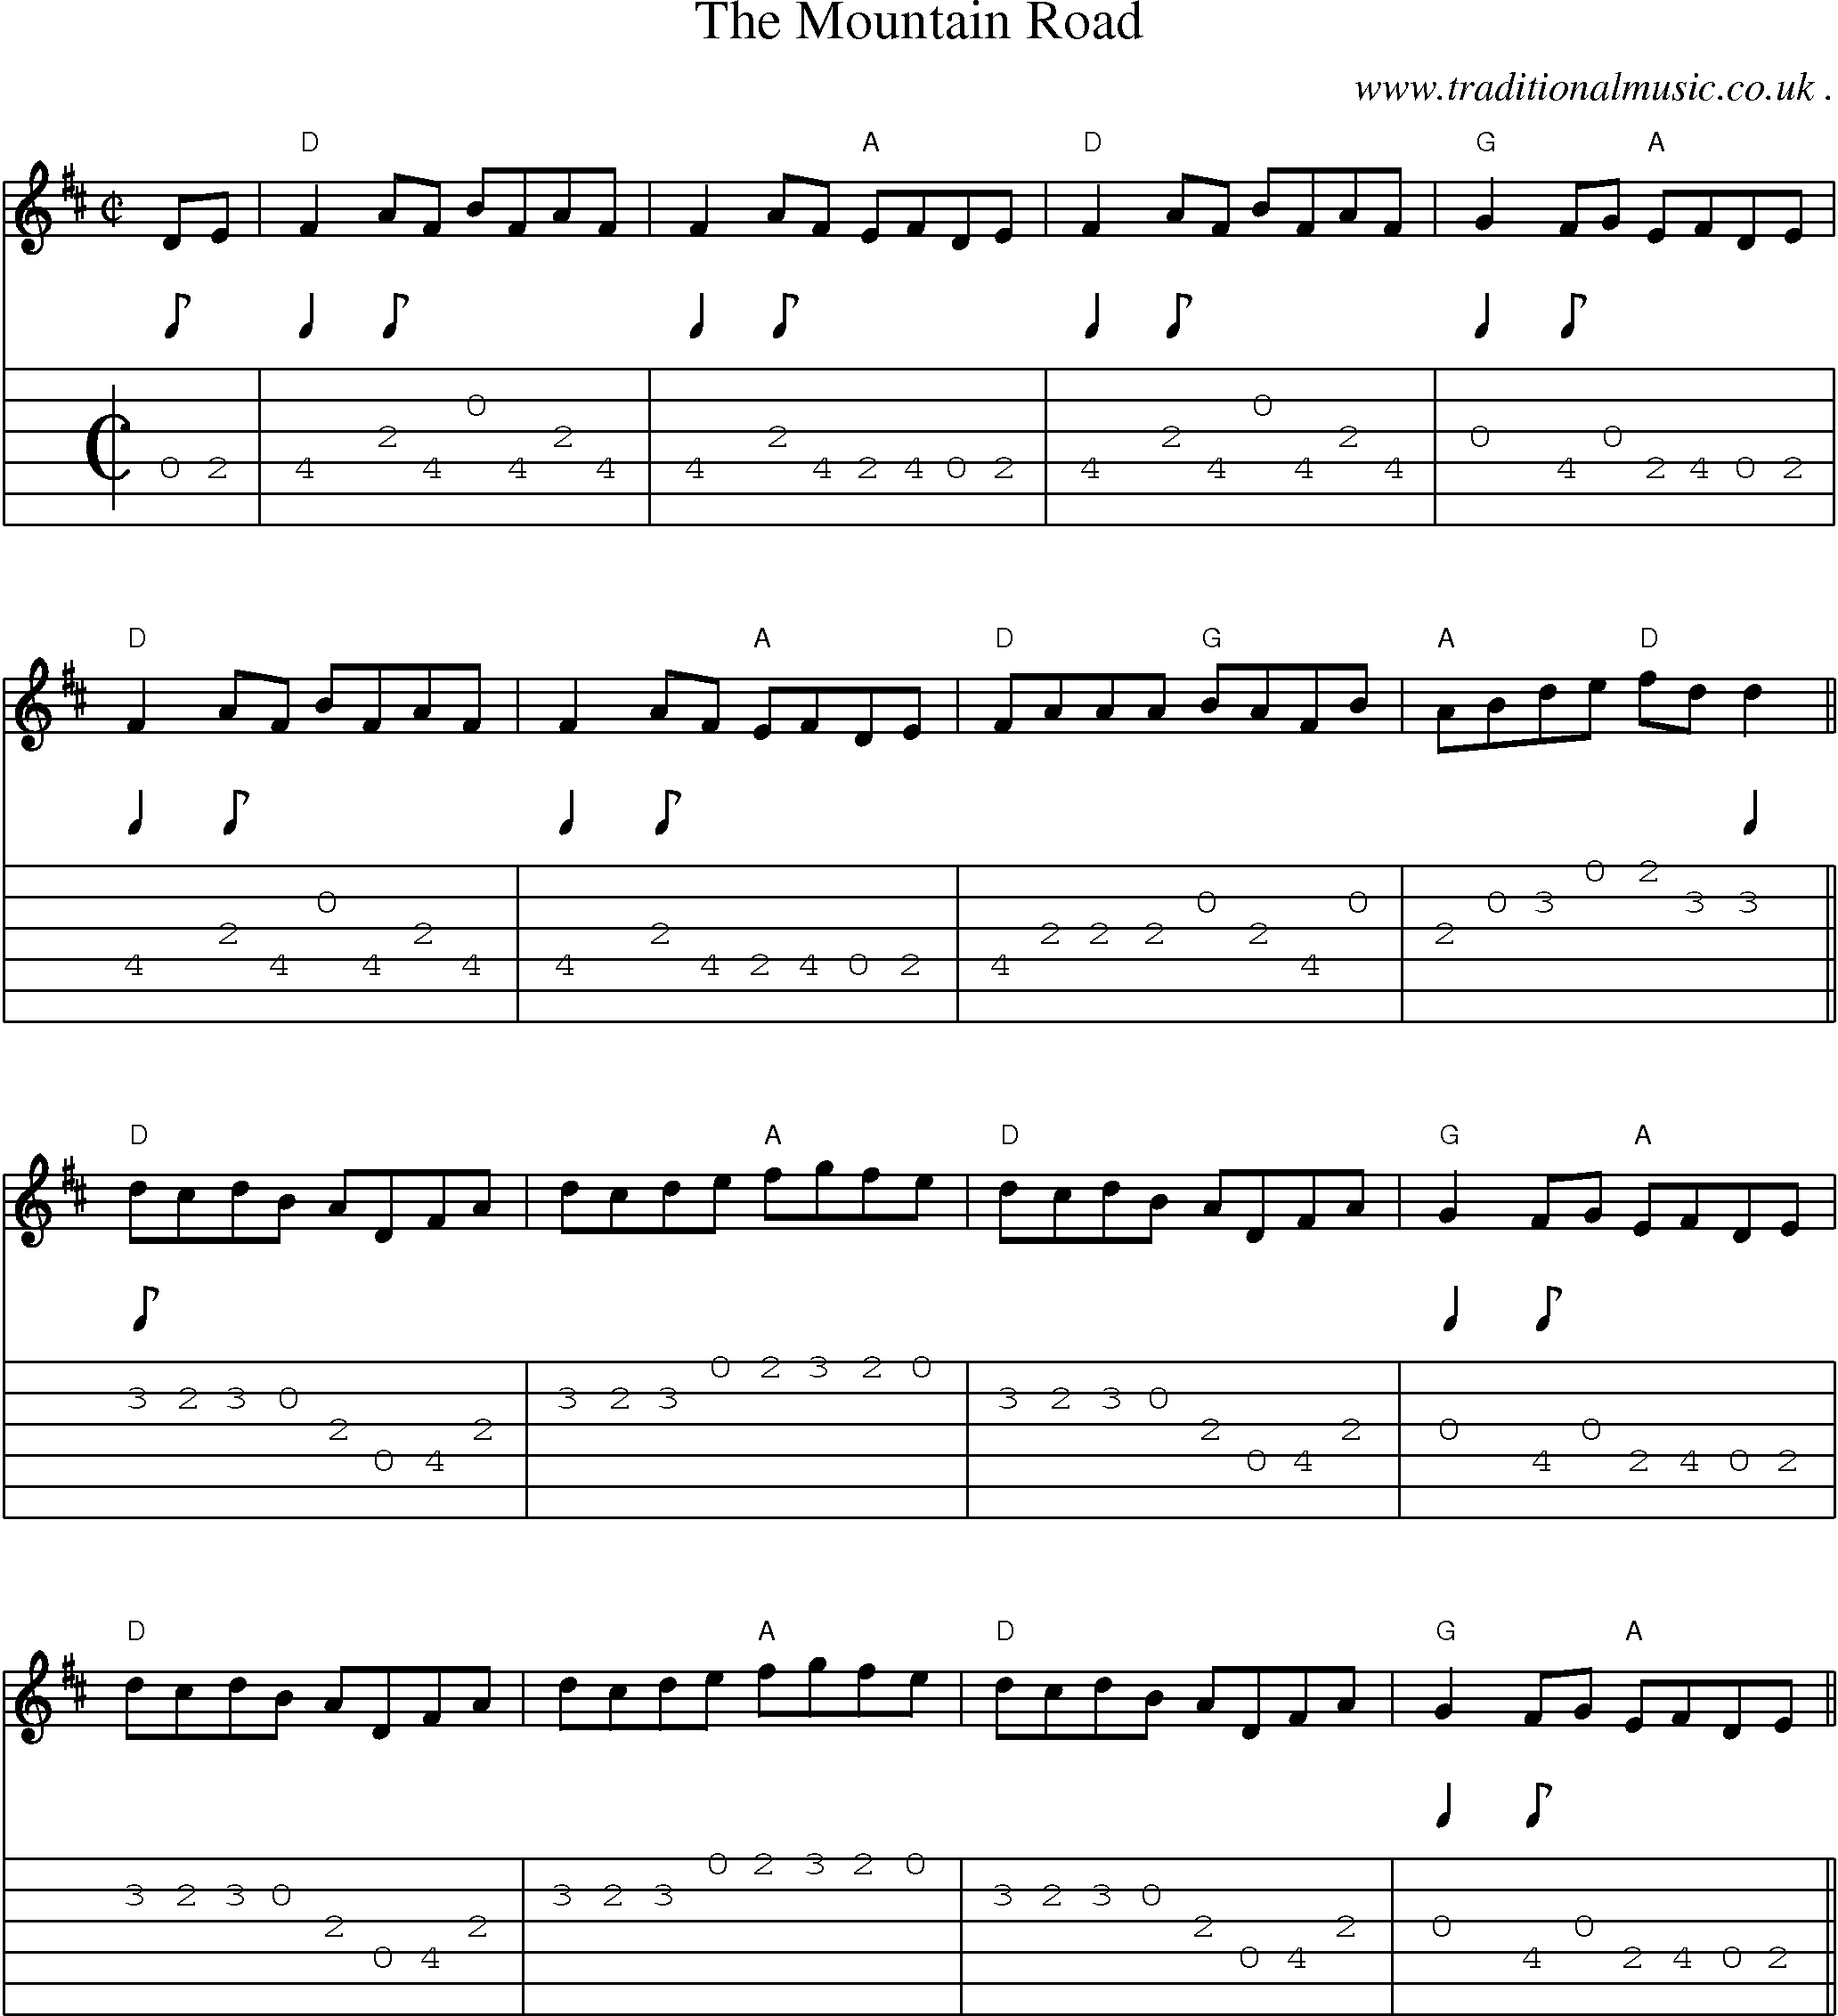 Music Score and Guitar Tabs for The Mountain Road